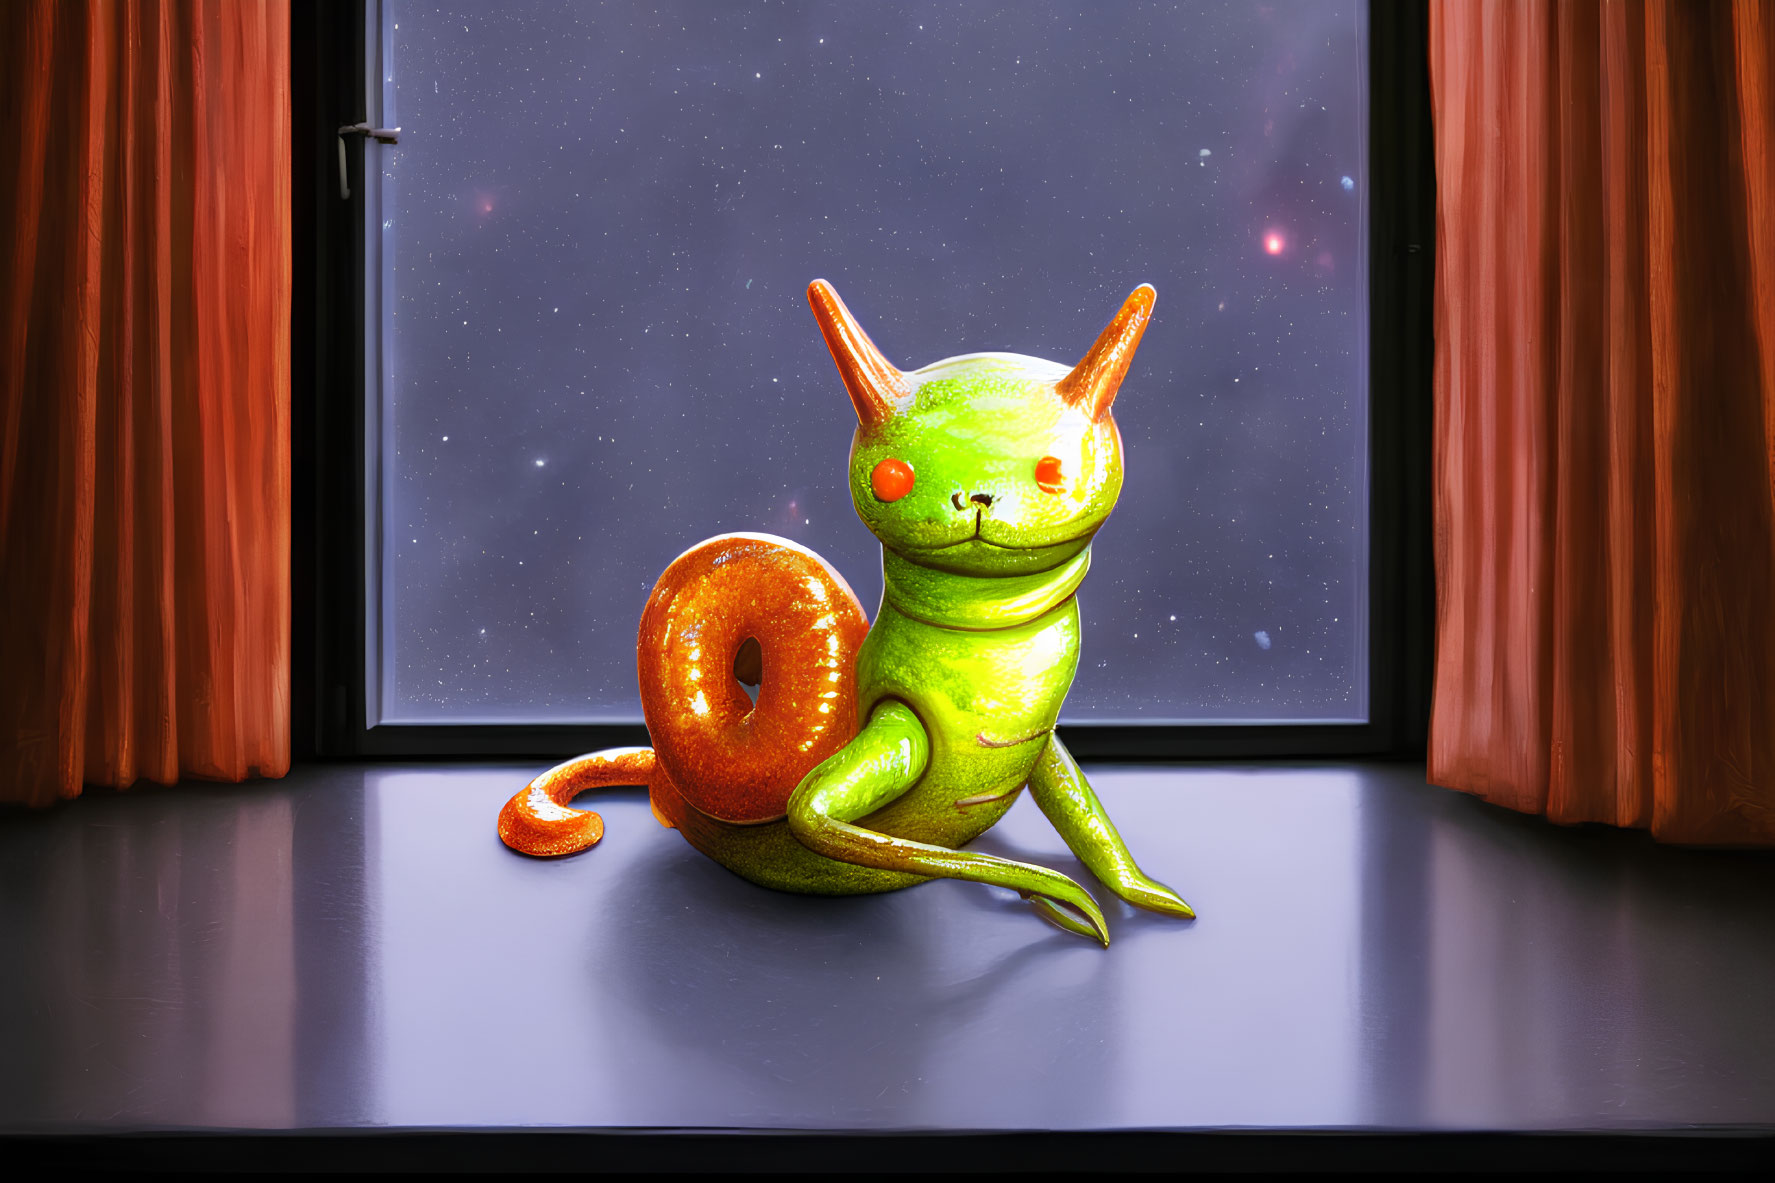 Whimsical creature with cat-like ears and snail shell admires starry night sky